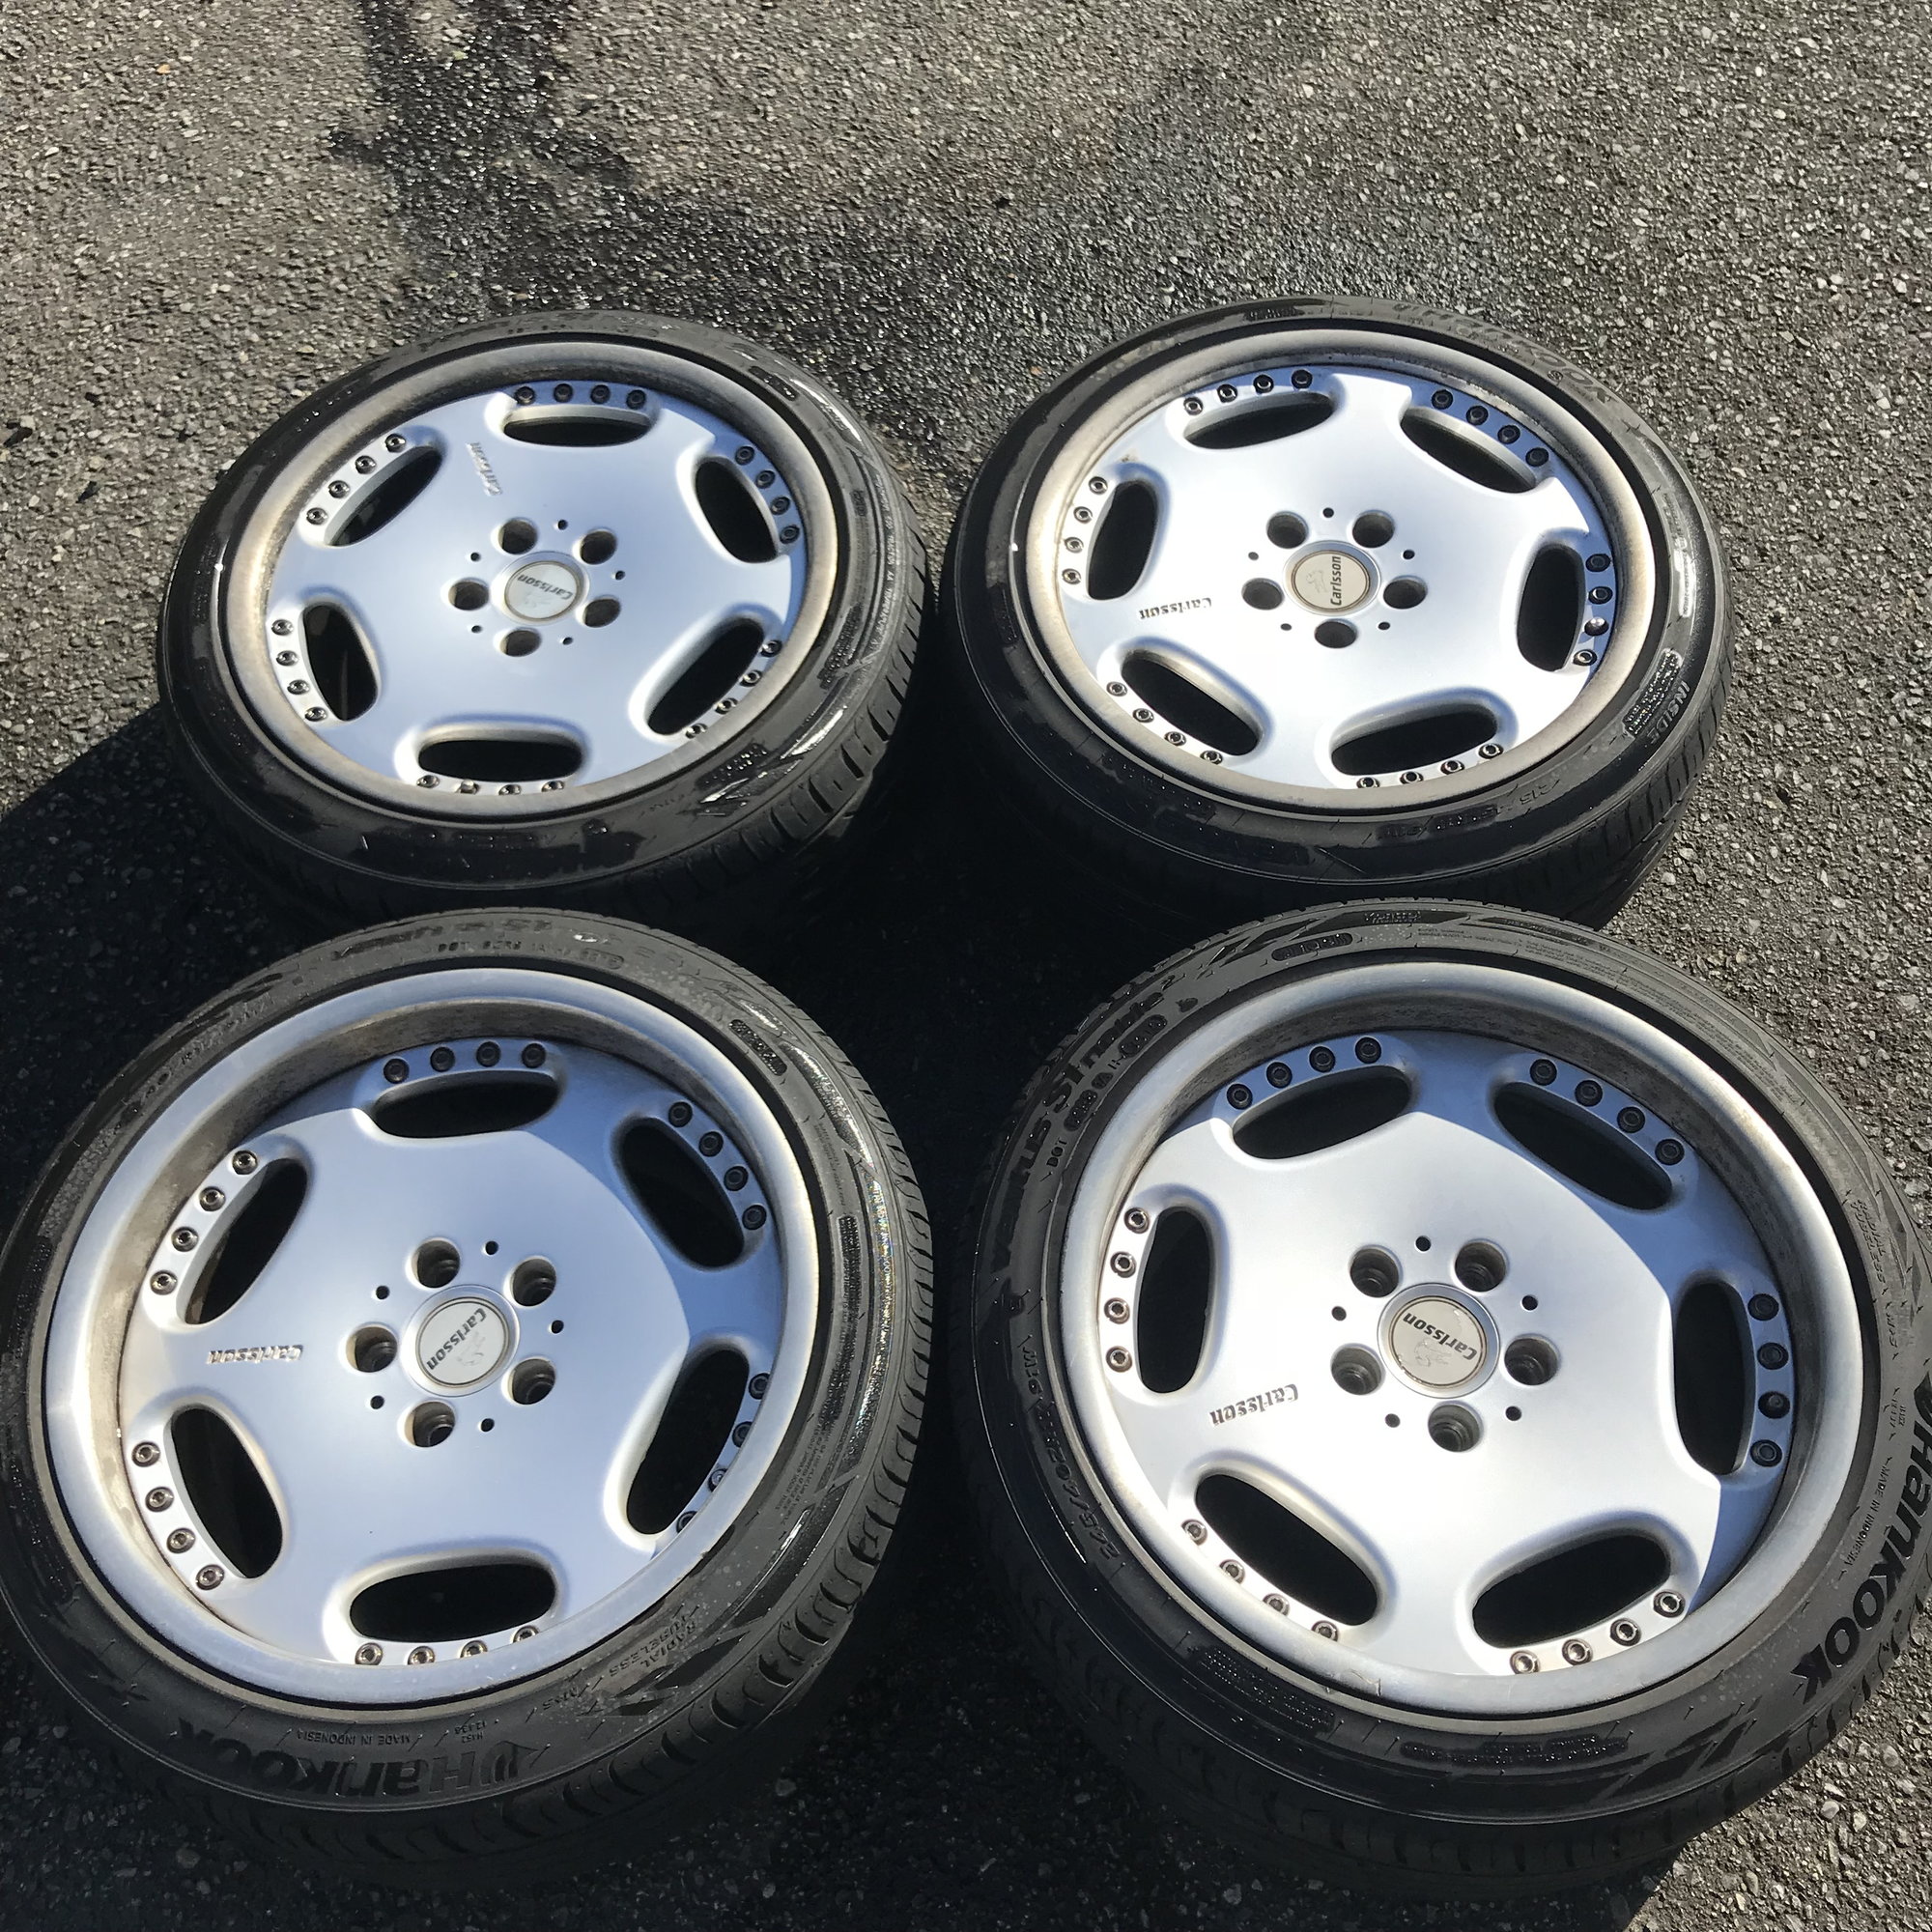 Wheels and Tires/Axles - 17" Carlsson 2/6 Wheels - Used - 1994 to 2000 Mercedes-Benz C280 - 1990 to 2002 Mercedes-Benz 500SL - Seattle, WA 98106, United States